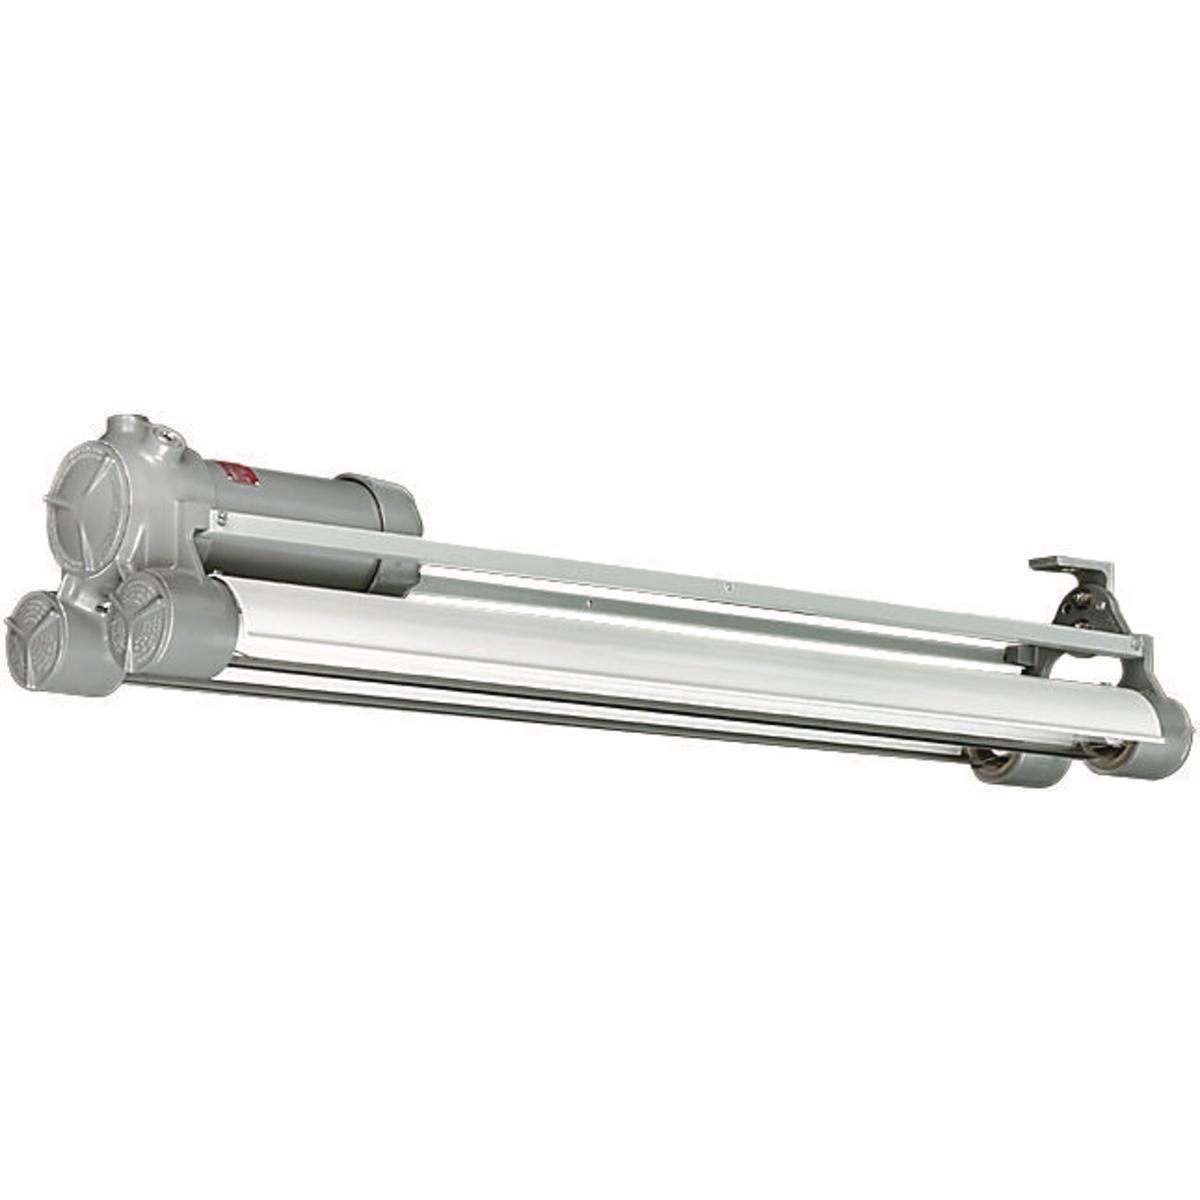 Hubbell HFX-800-44 List Price $12,411.32 - Closeout Price $1100.00 - WHILES SUPPLIES LAST - HFX 60W 277V 4 Lamp  ; UL Listed and labeled for use inside paint spray booths and rooms ; 2’ nominal compact models facilitate use in areas too small for nominal 4’ models, or where